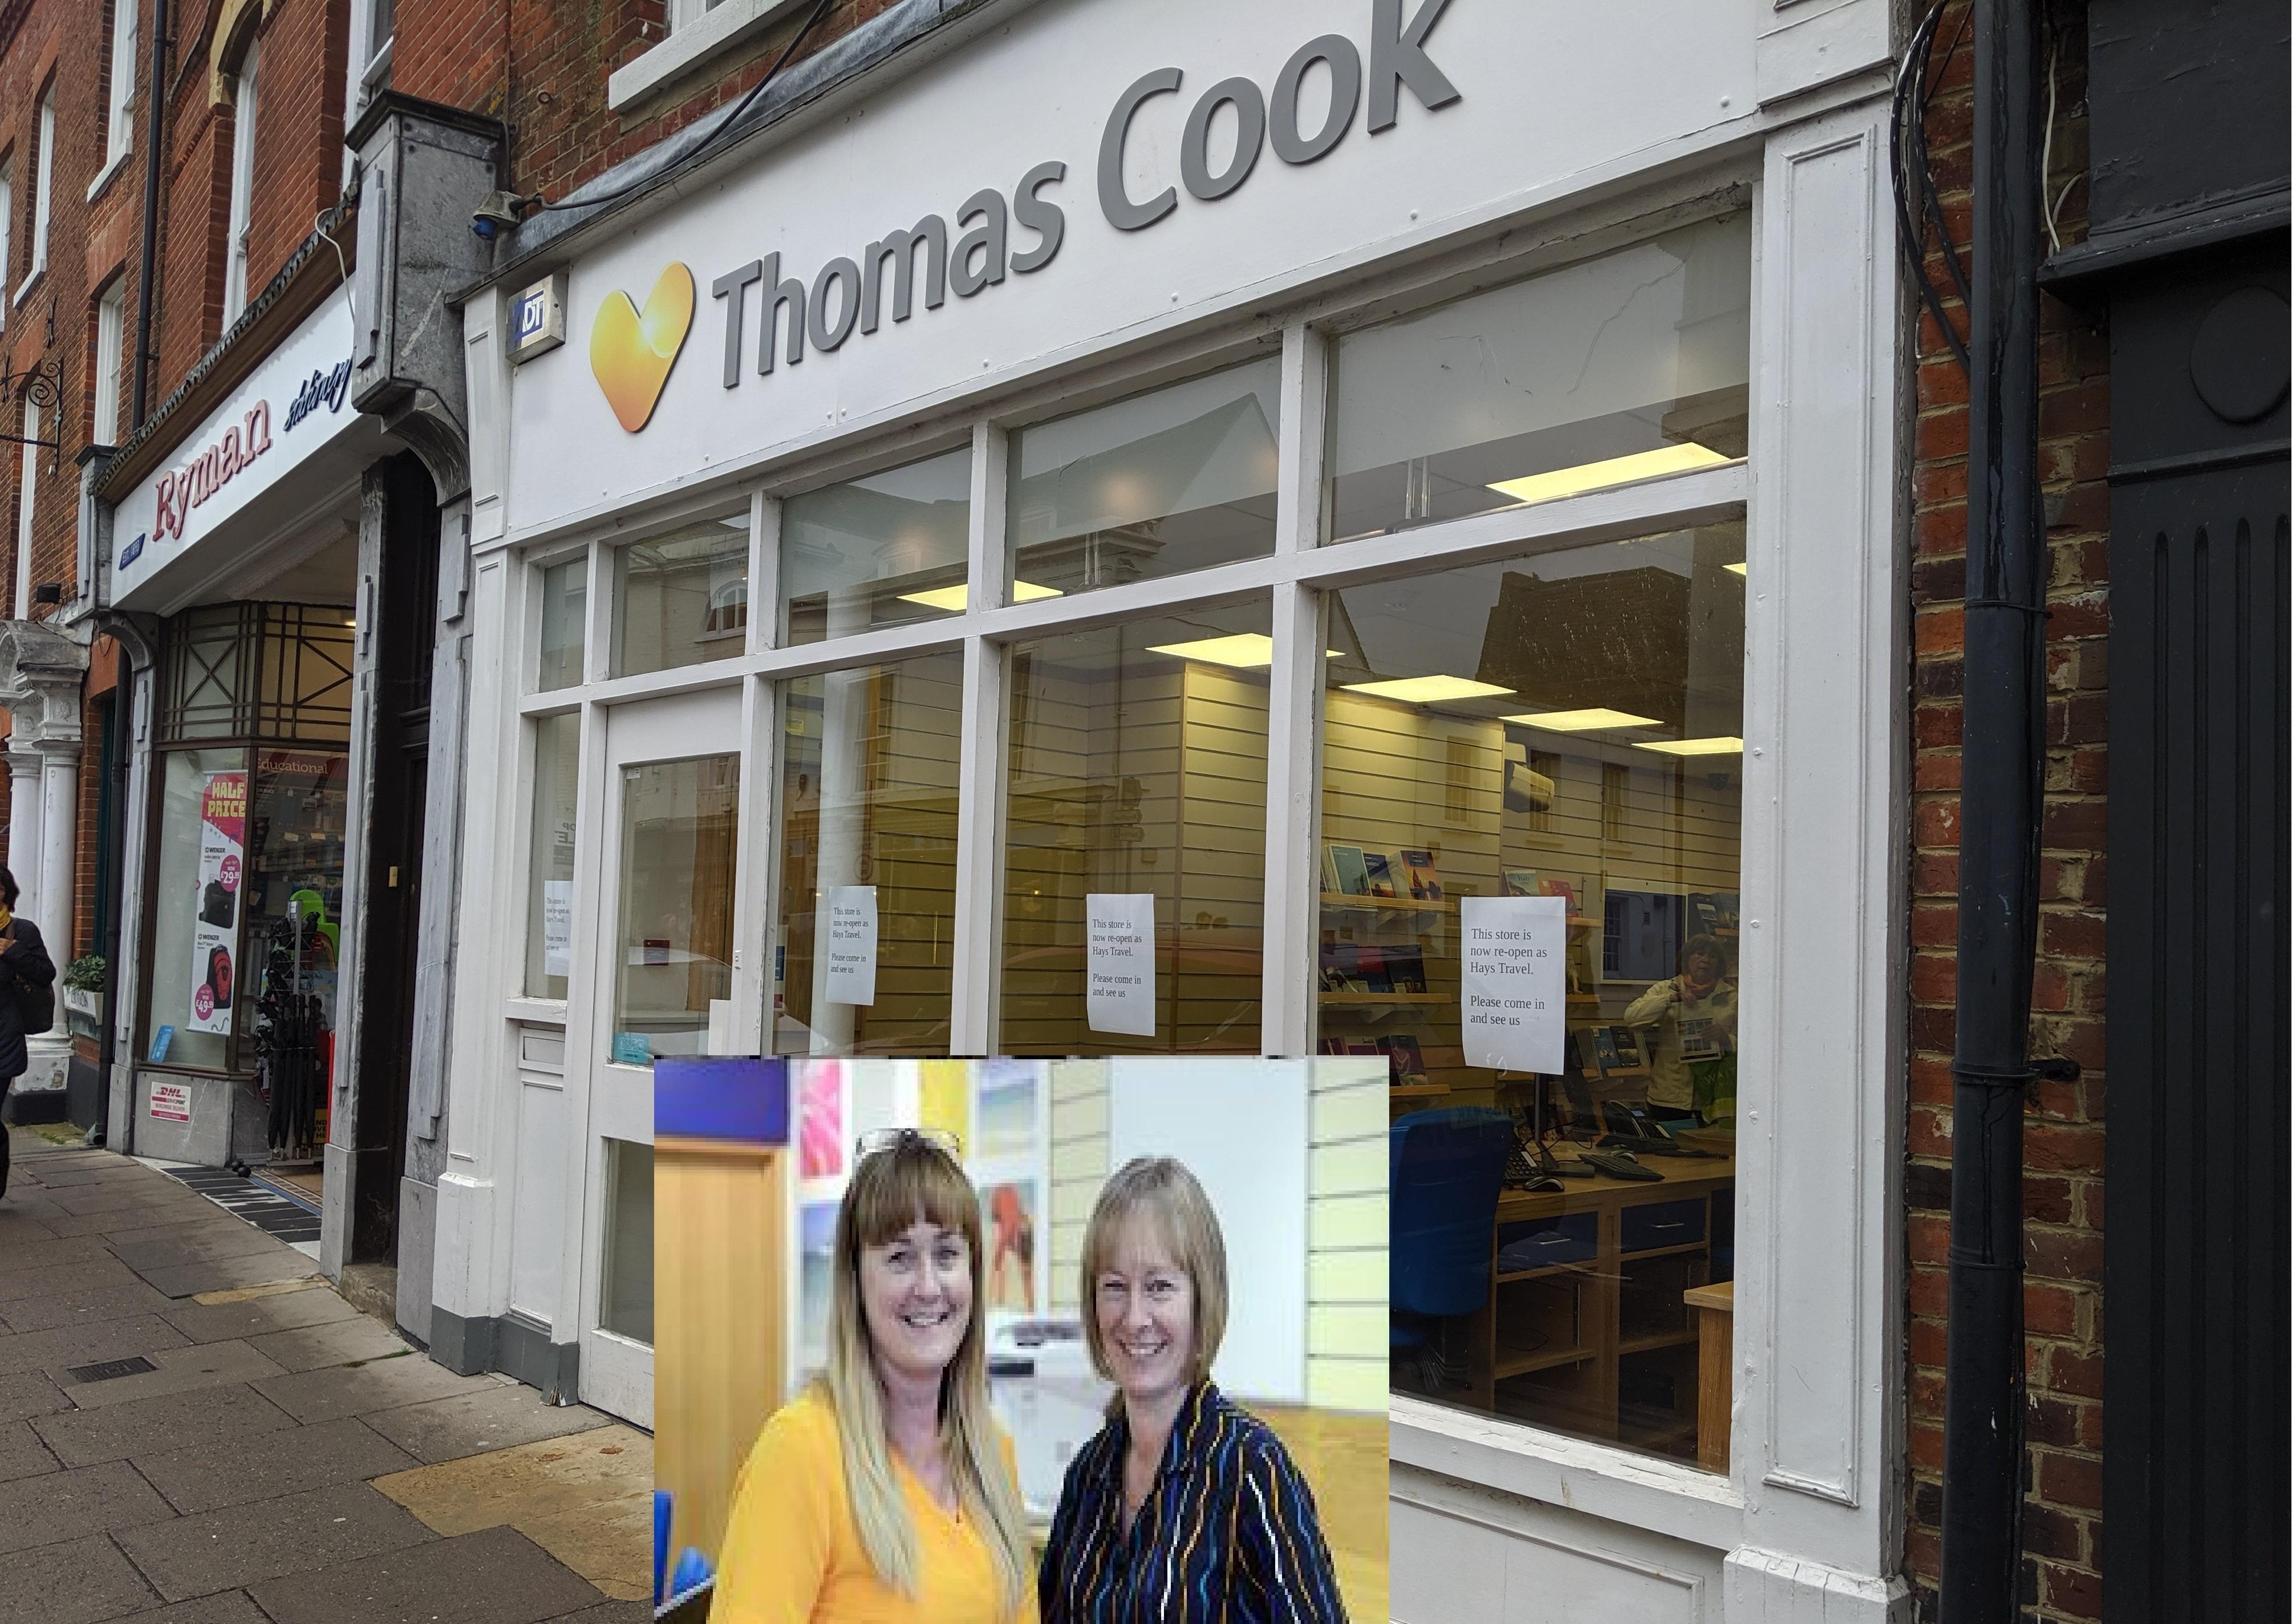 The former Thomas Cook branch in East Street, Chichester, was reopened to the public under new ownership and all staff members were ‘offered their positions back’, after Hays Travel bought 404 of the company’s collapsed network of shops. SUS-191115-153509001